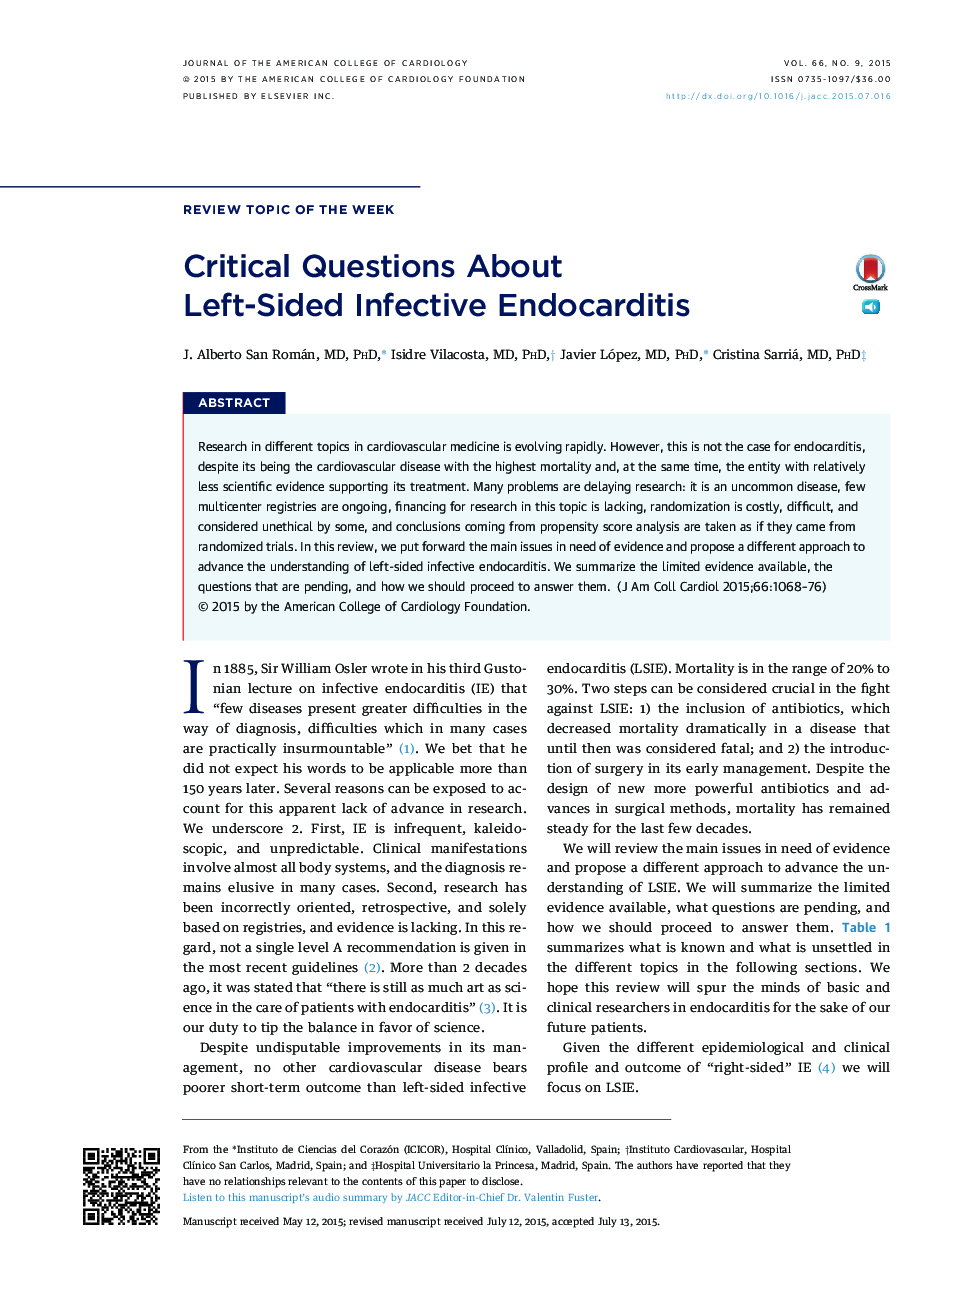 Critical Questions About Left-Sided Infective Endocarditis 